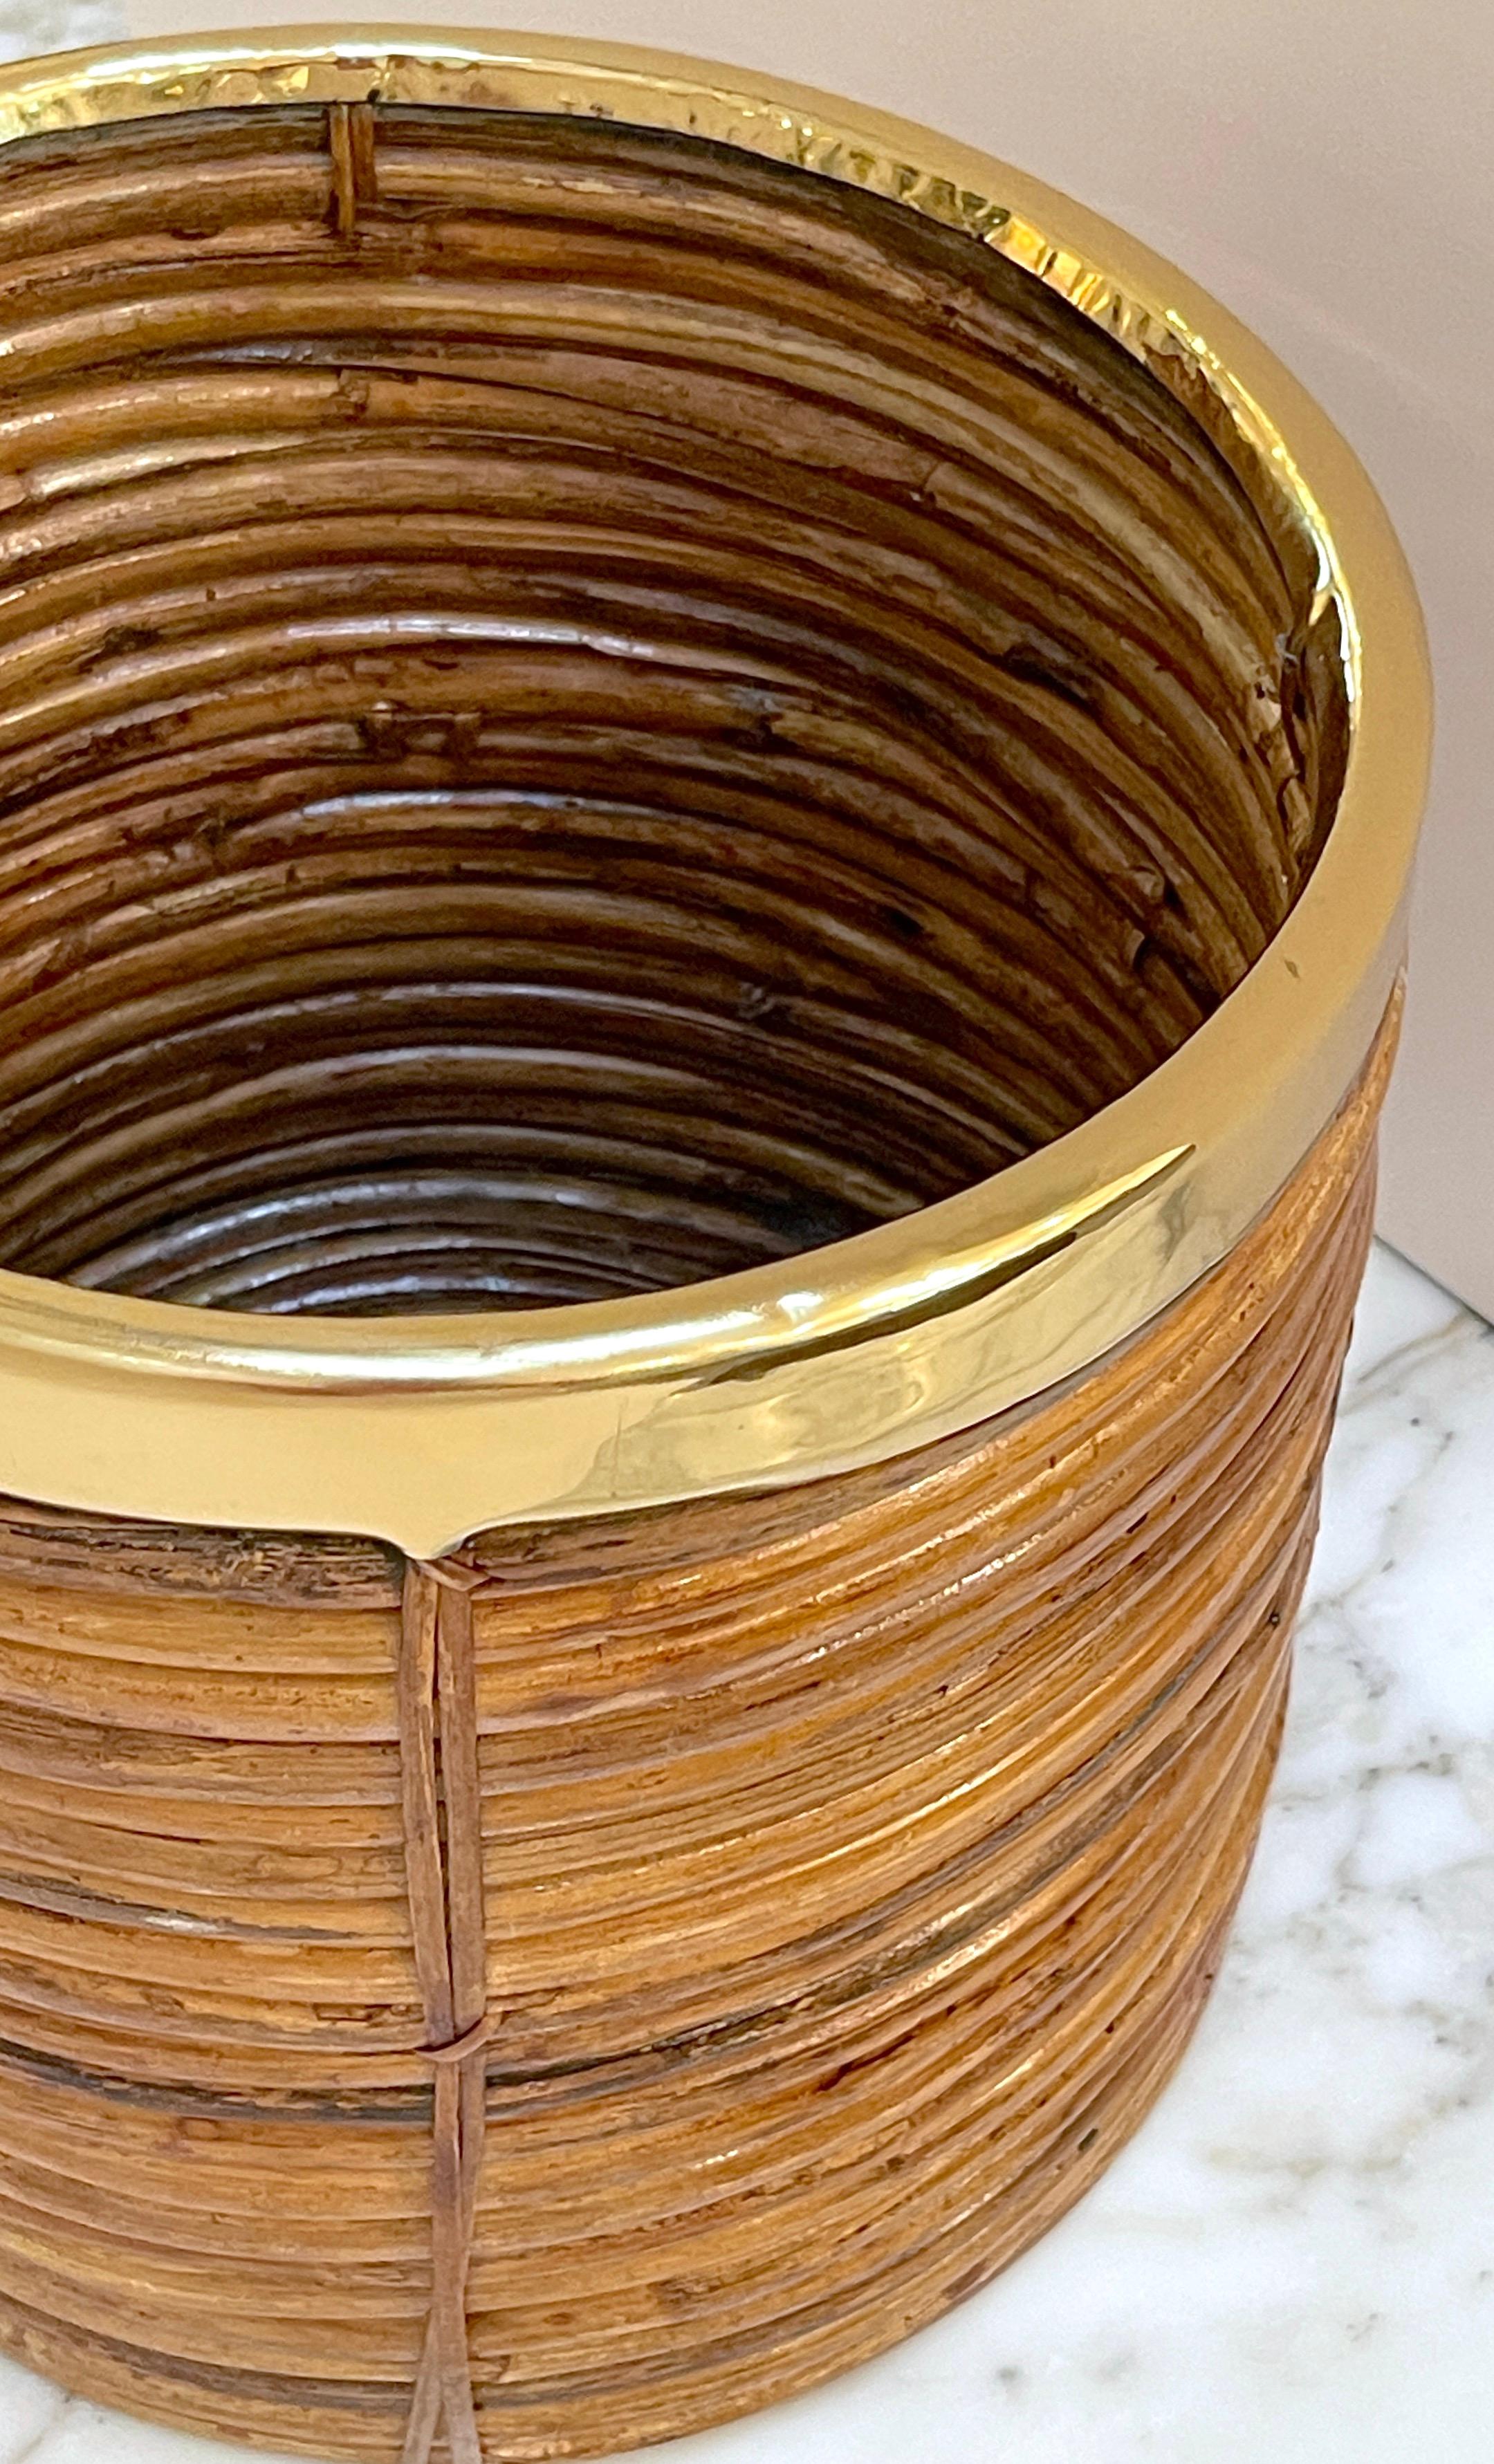 1970s Italian Bamboo/ Rattan Wastepaper Basket with Polished Brass Rim For Sale 4